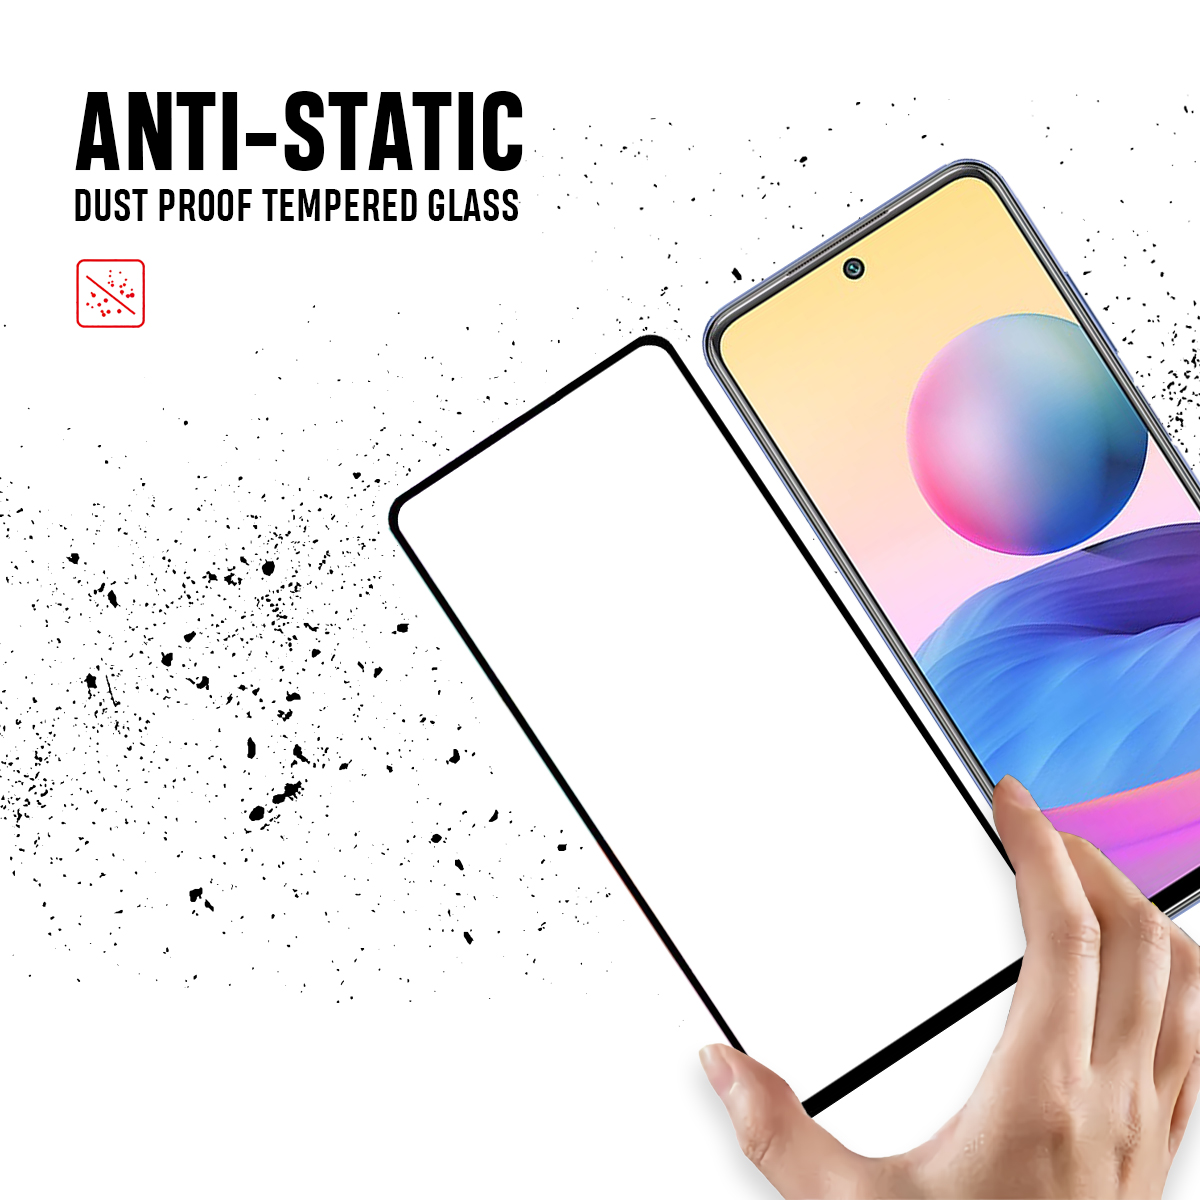 Beyox ESD Anti Static 5D Glass for Redmi Note 9S